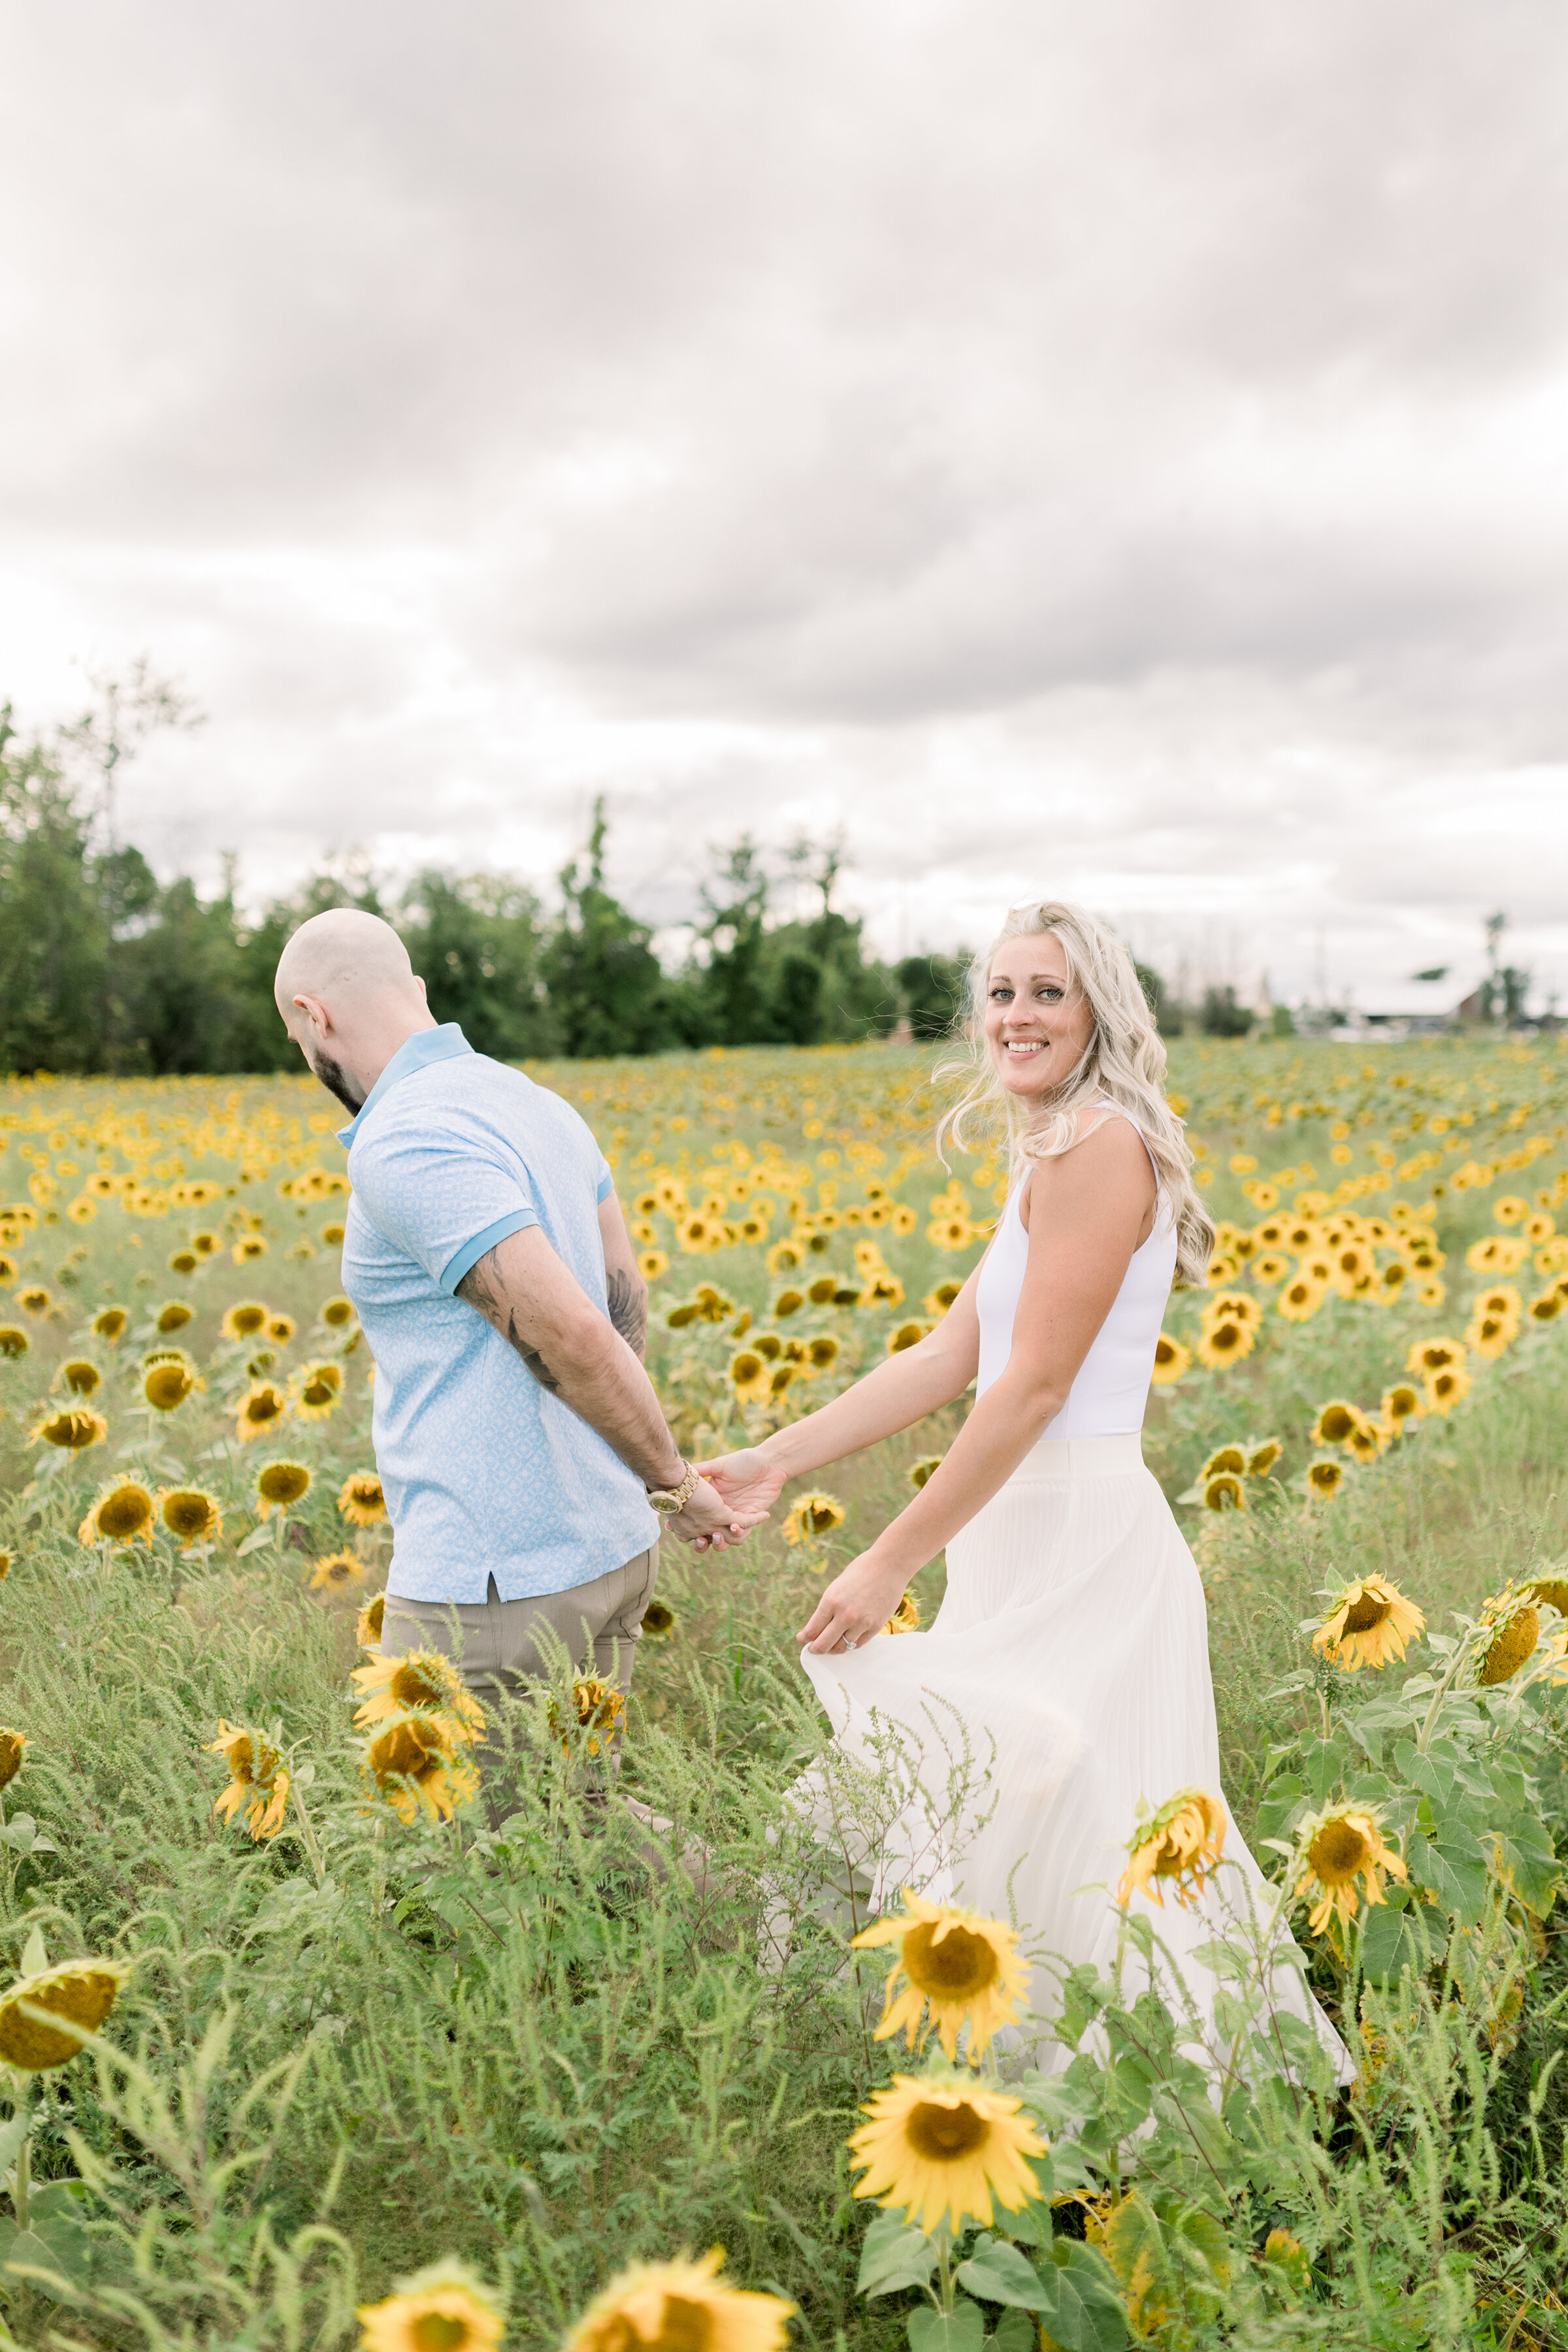  A man leads his beautiful fiancé through the sunflowers as she looks back at the camera in a beautiful bright and airy engagement session in Ottawa, Ontario. Chelsea Mason Photography professional engagement photographer outdoor photo shoot location